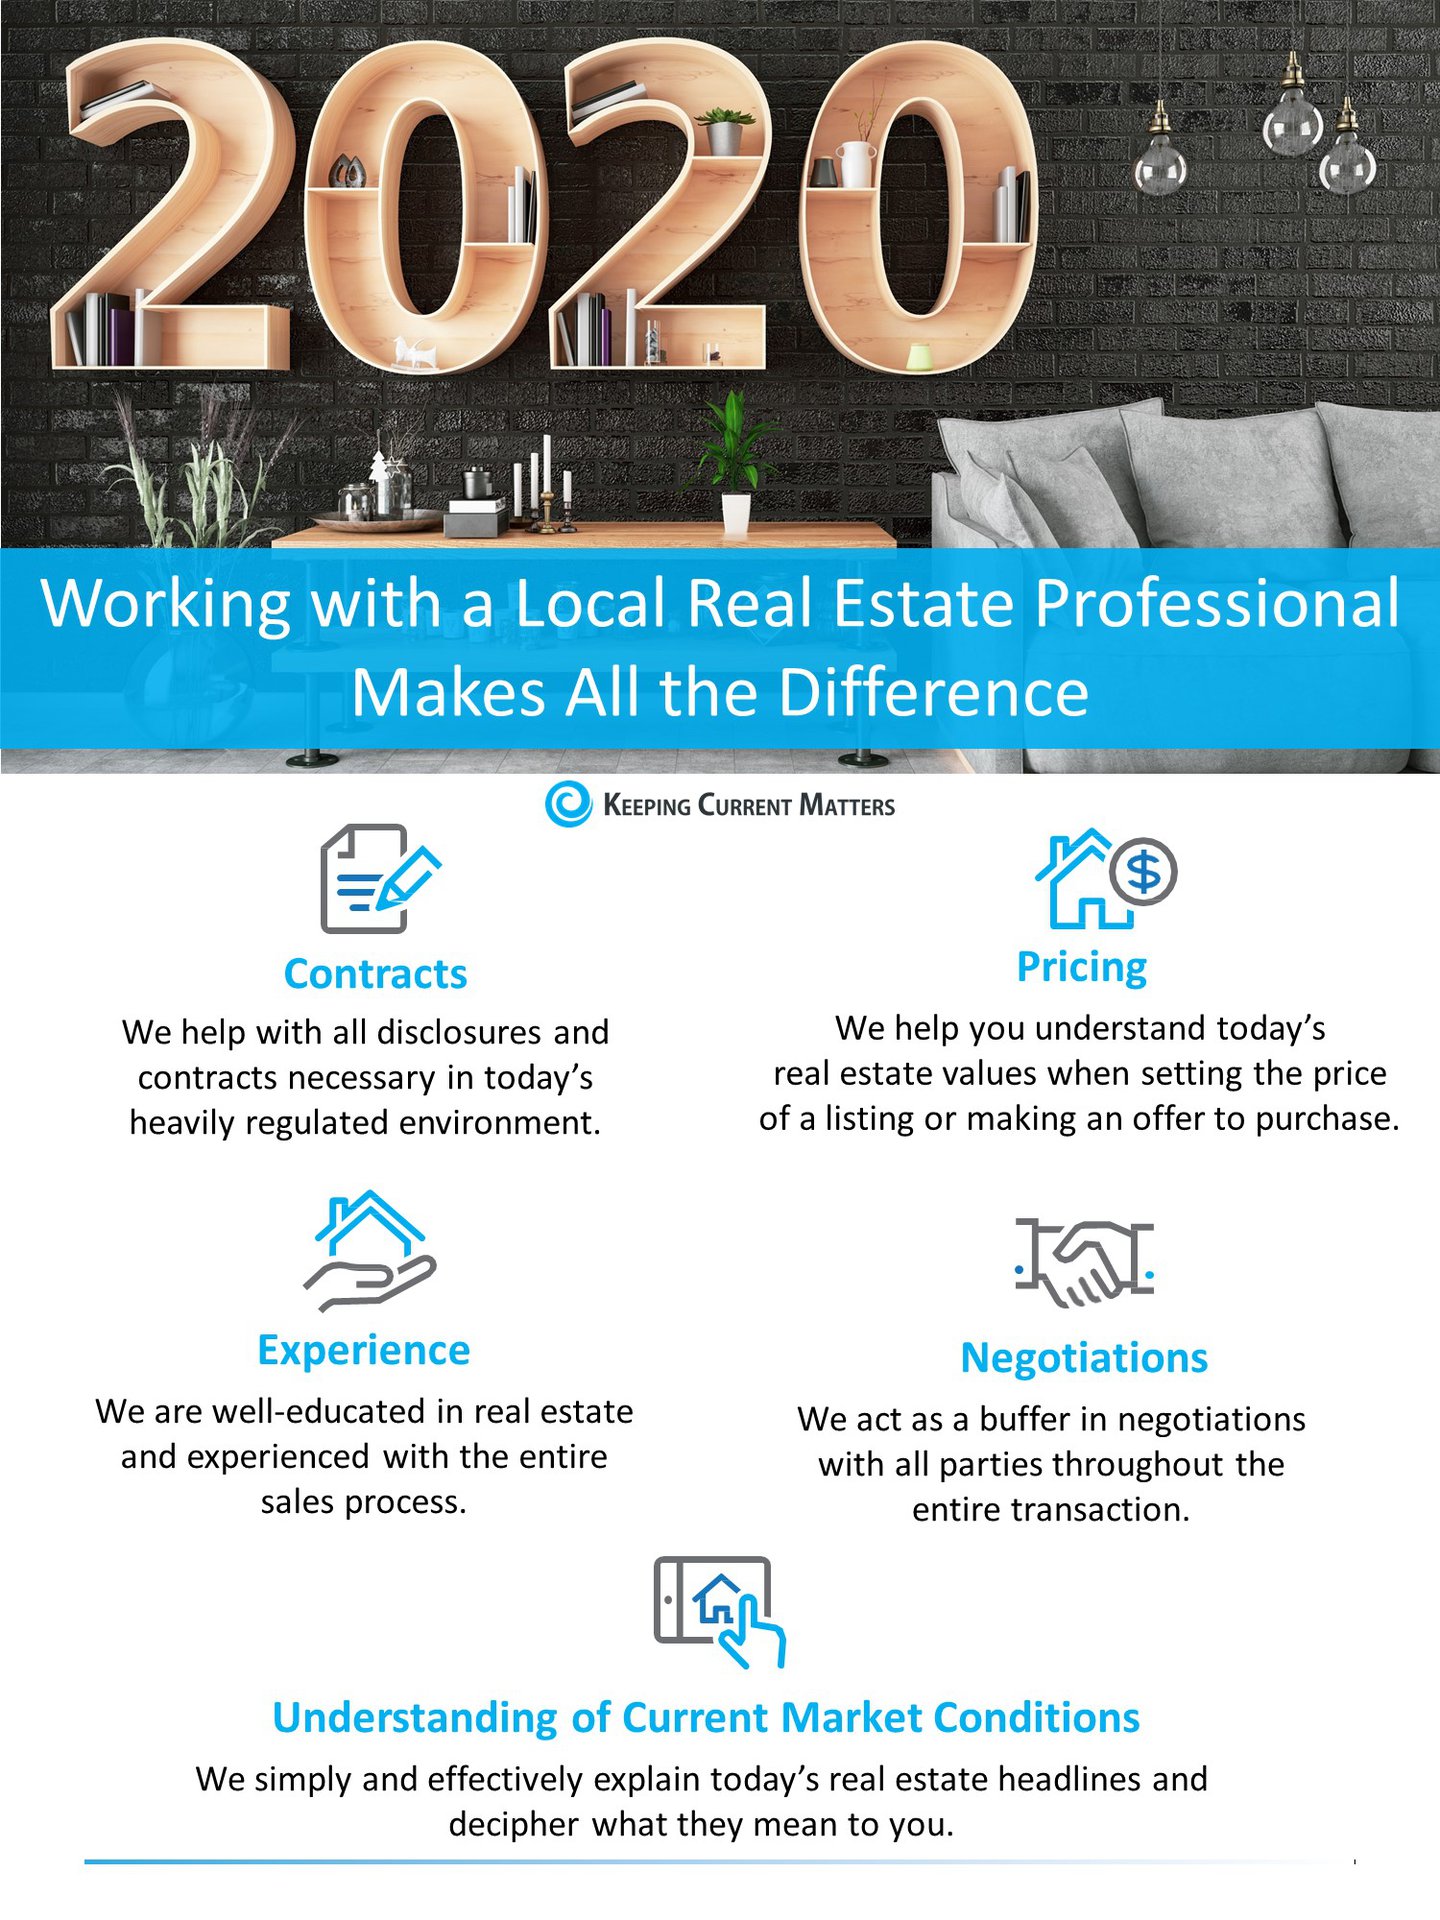 Working with a Local Real Estate Professional Makes All the Difference [INFOGRAPHIC] | Keeping Current Matters